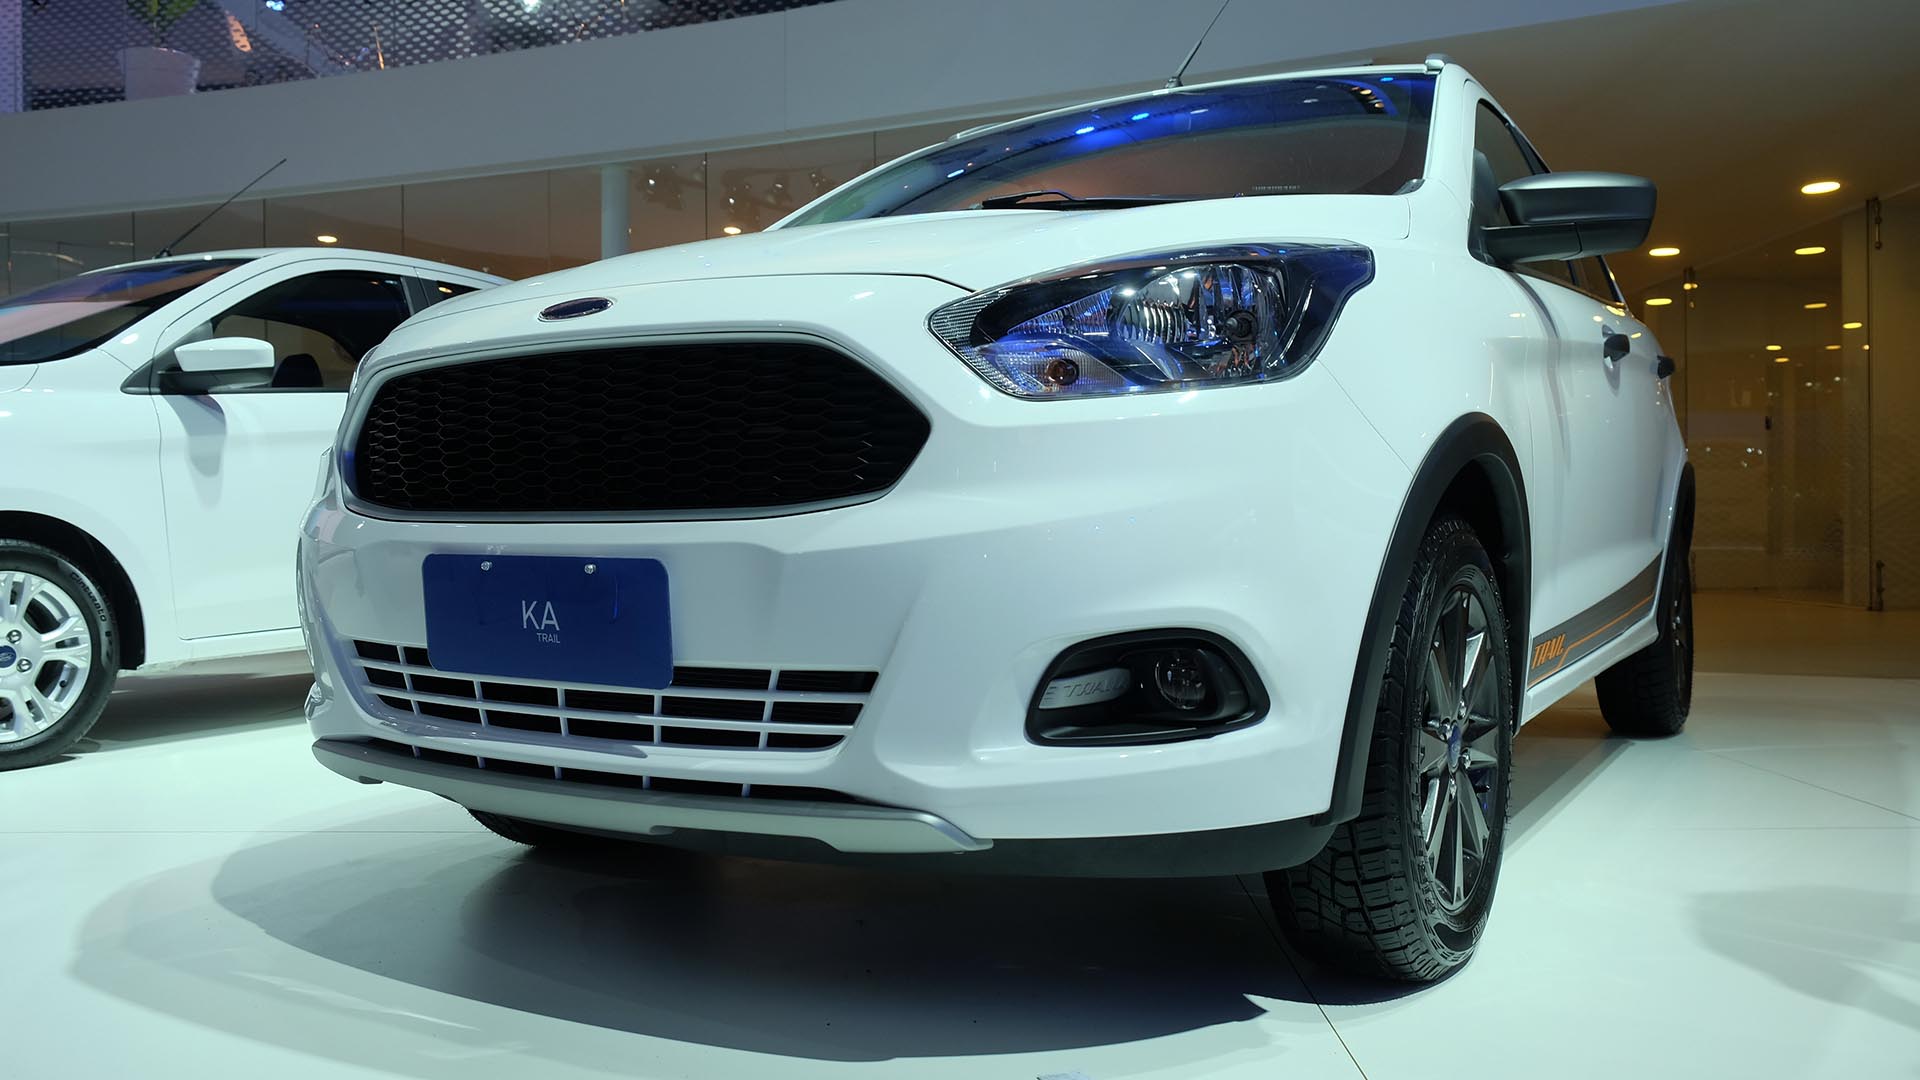 Ford Figo Freestyle Debut on January 31 - Launch Details, Price, Specs